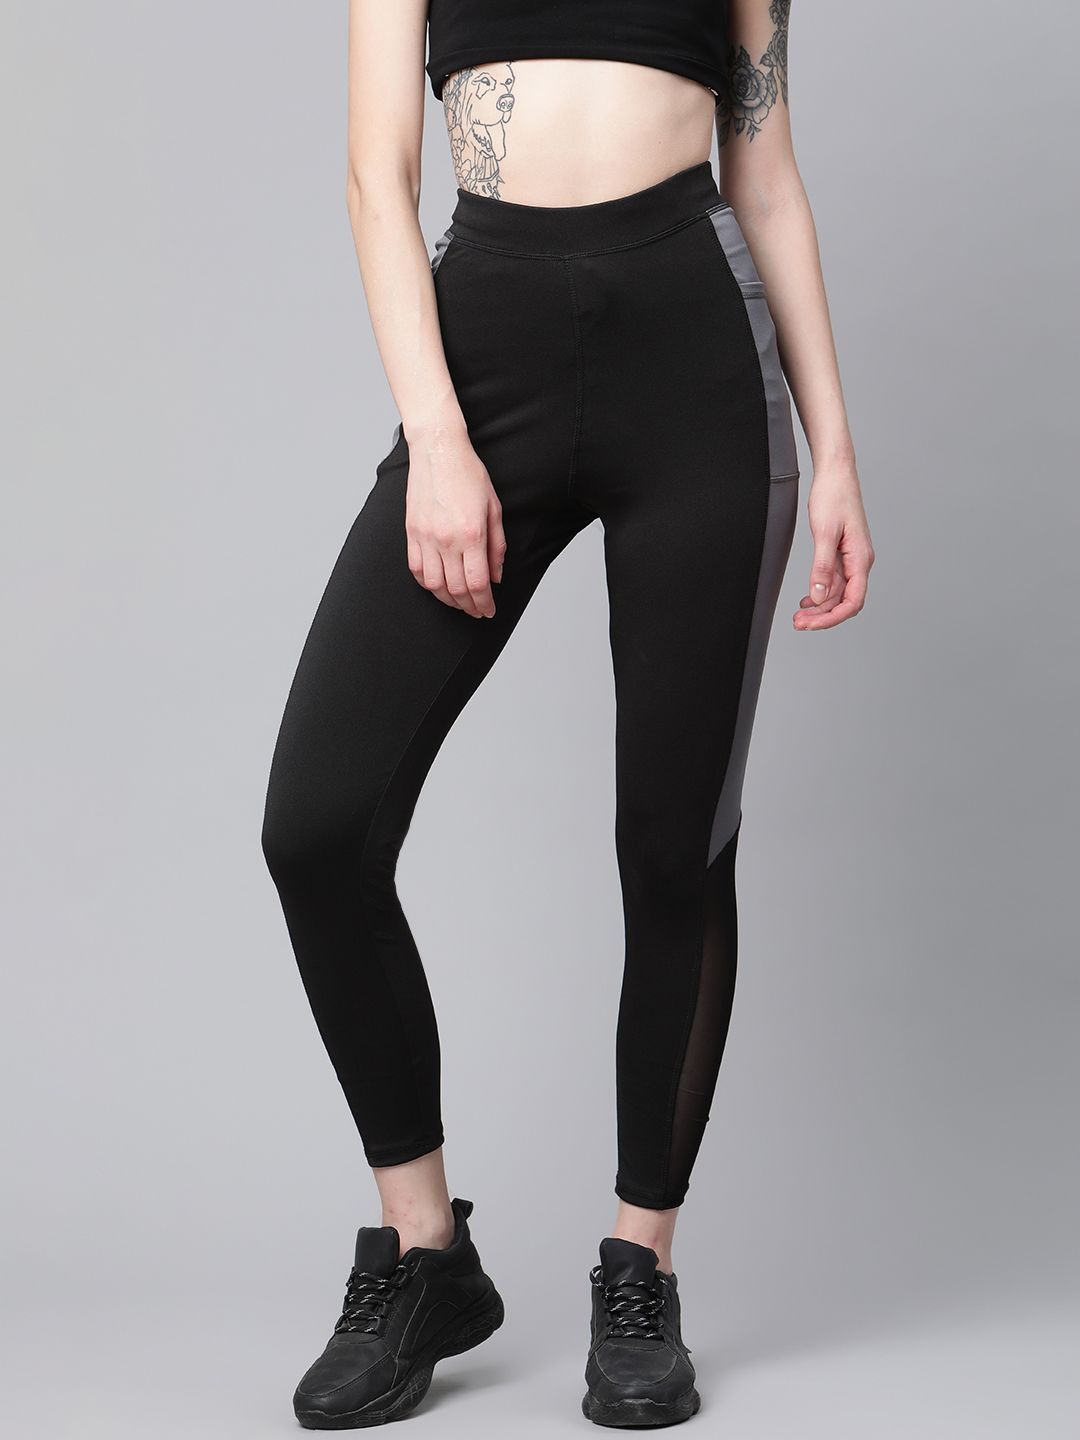 Blinkin Women Black & Charcoal Grey Colourblocked Training Tights with Mesh Inserts Detail Price in India